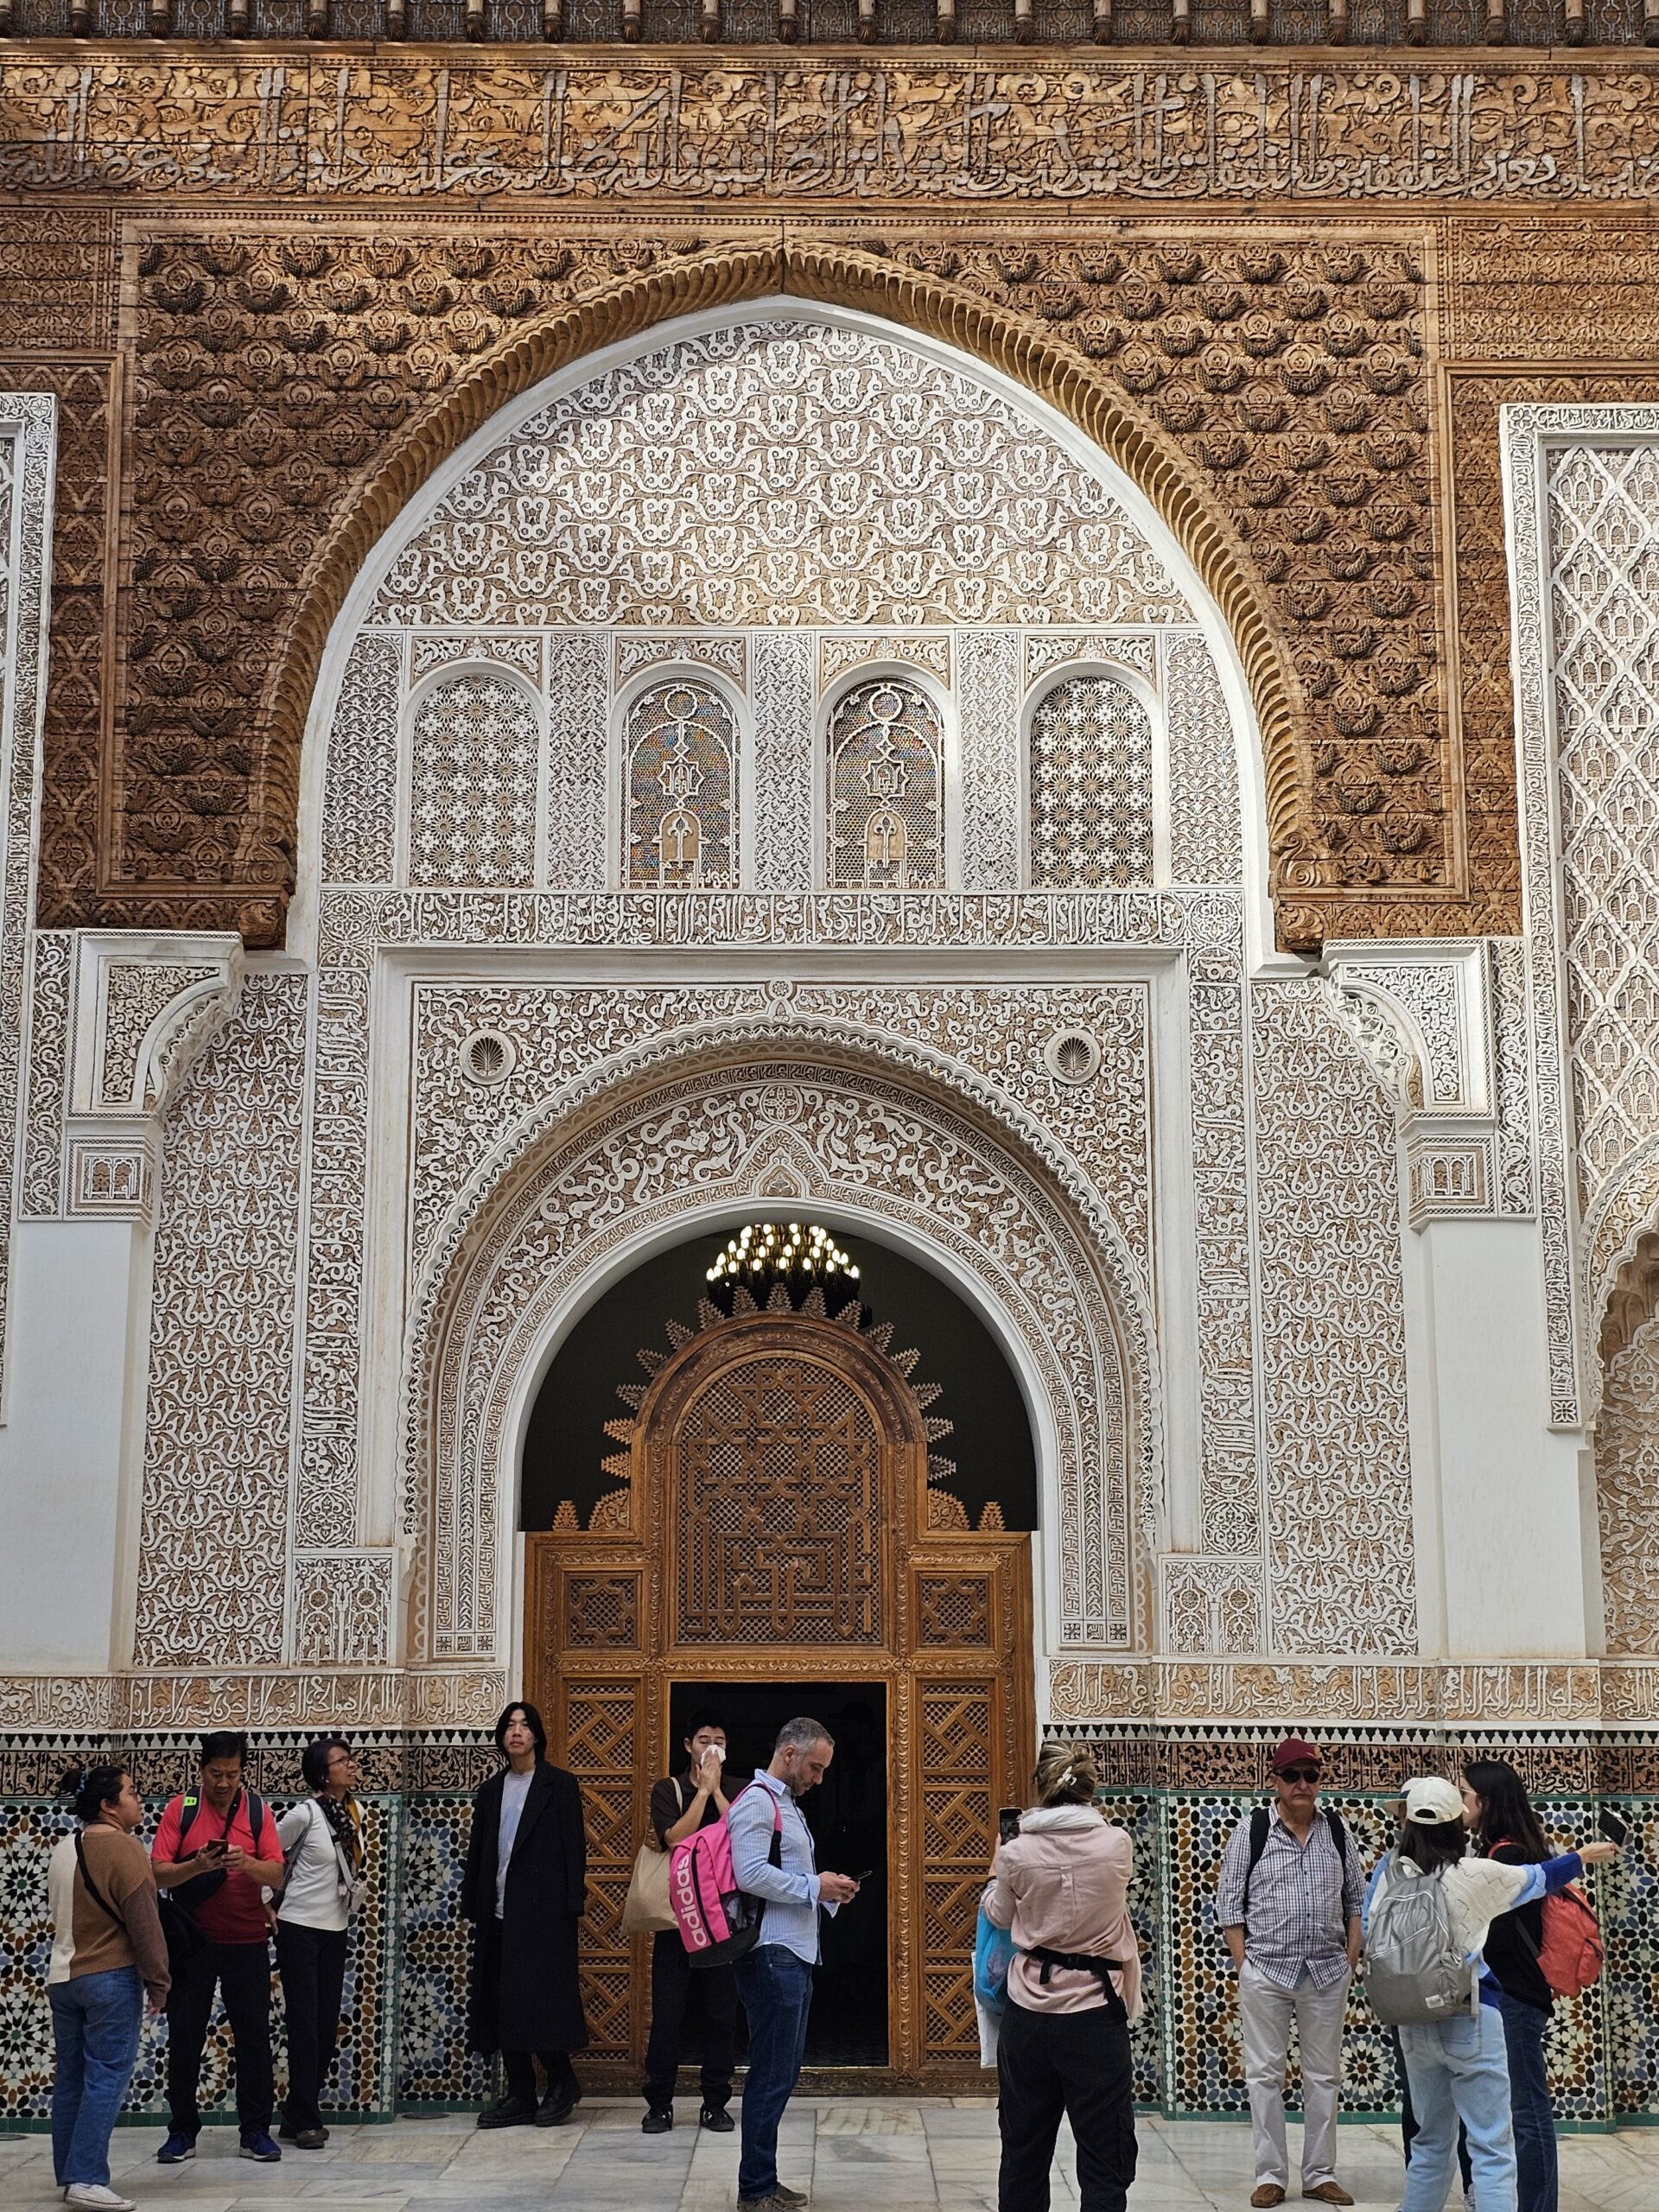 A gorgeously carved wooden wall with door at Ben Youssef Madrasa, Narrakesh. Image by 360onhistory.com